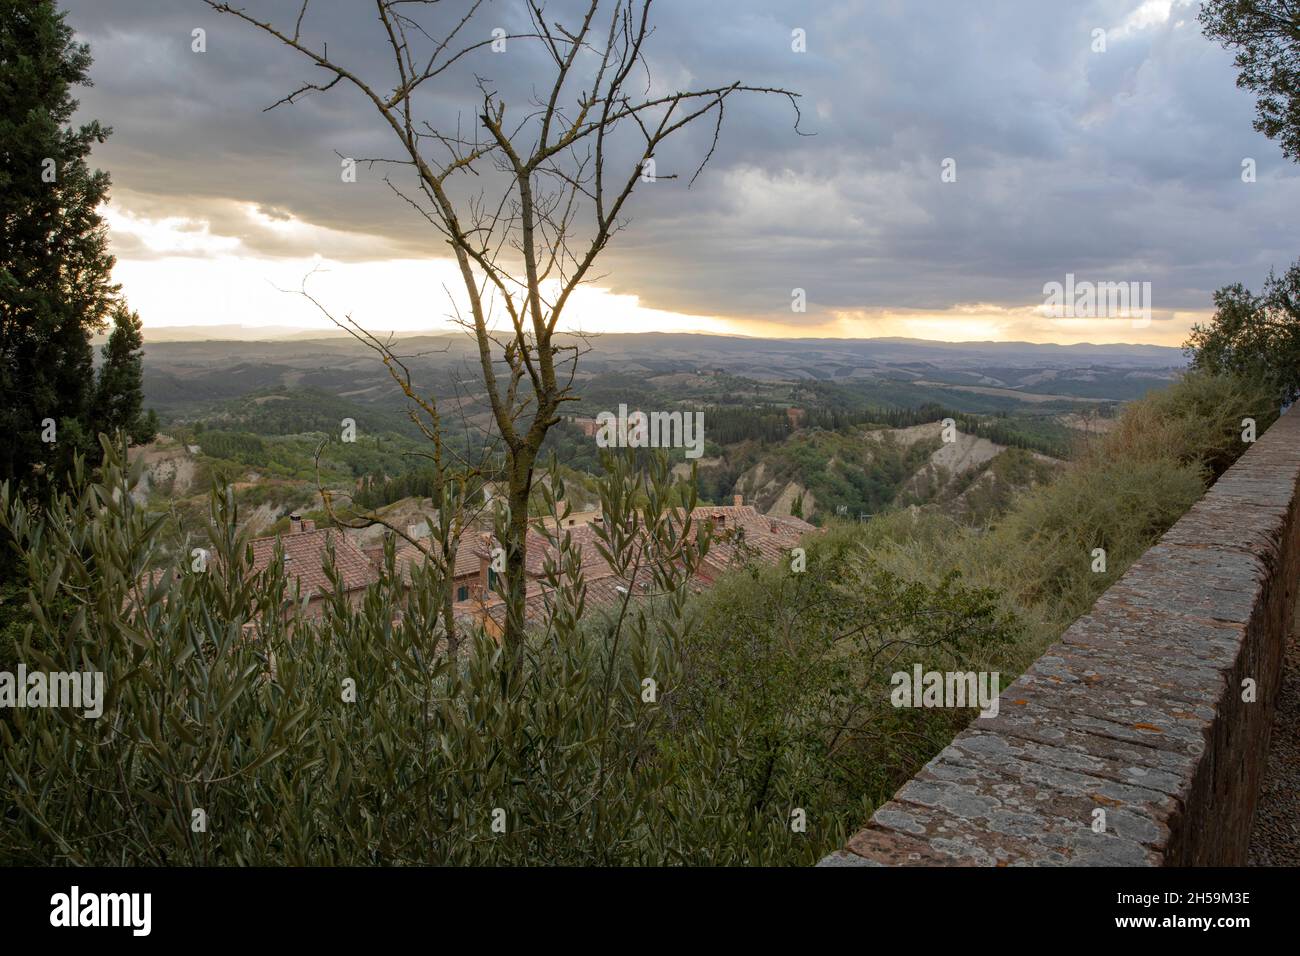 Landscape view from Chiusure village, Asciano, Tuscany, Italy Stock Photo